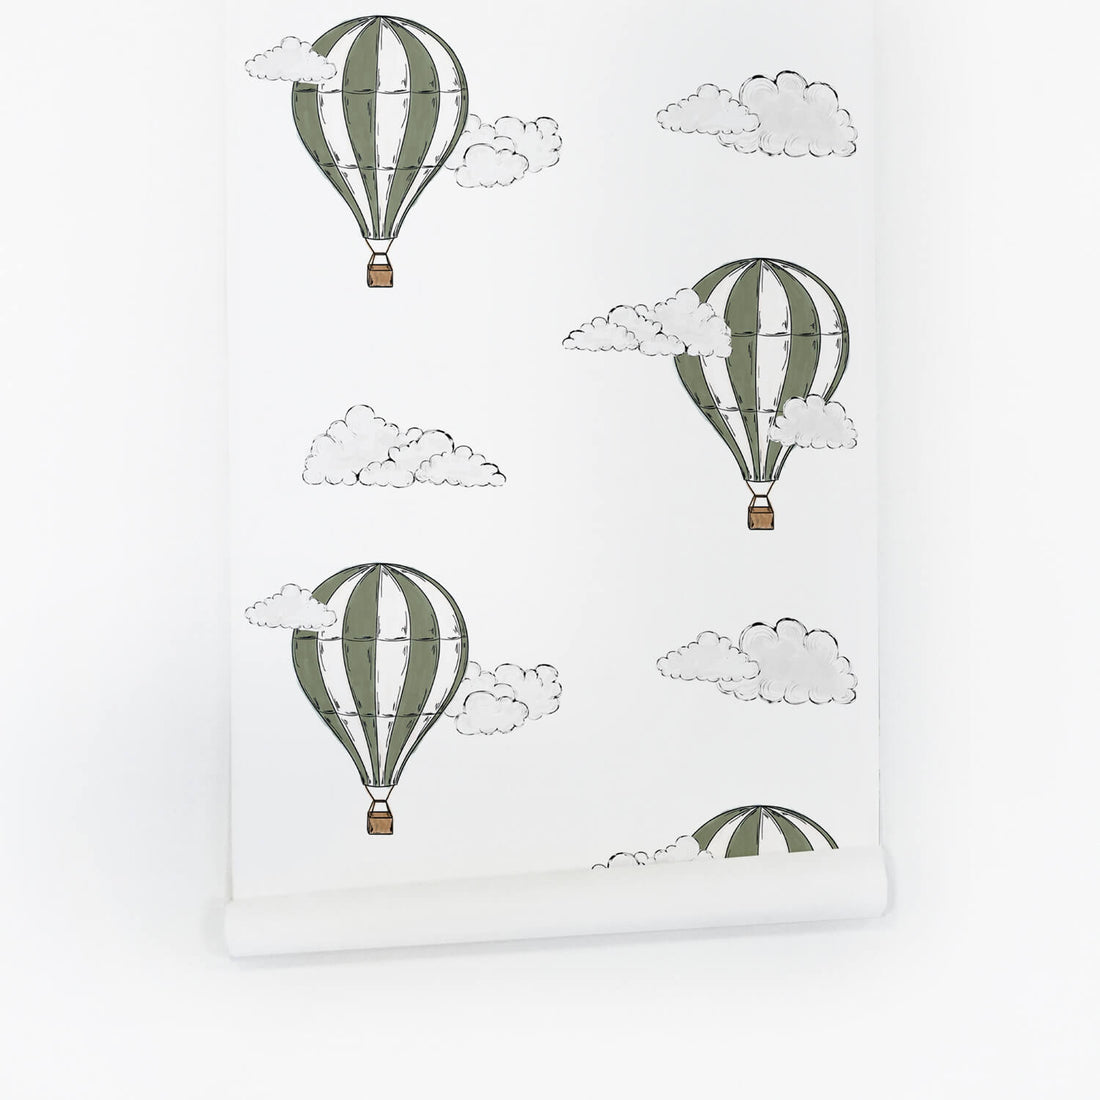 Khaki green removable wallpaper with hot air balloon design in watercolor technique